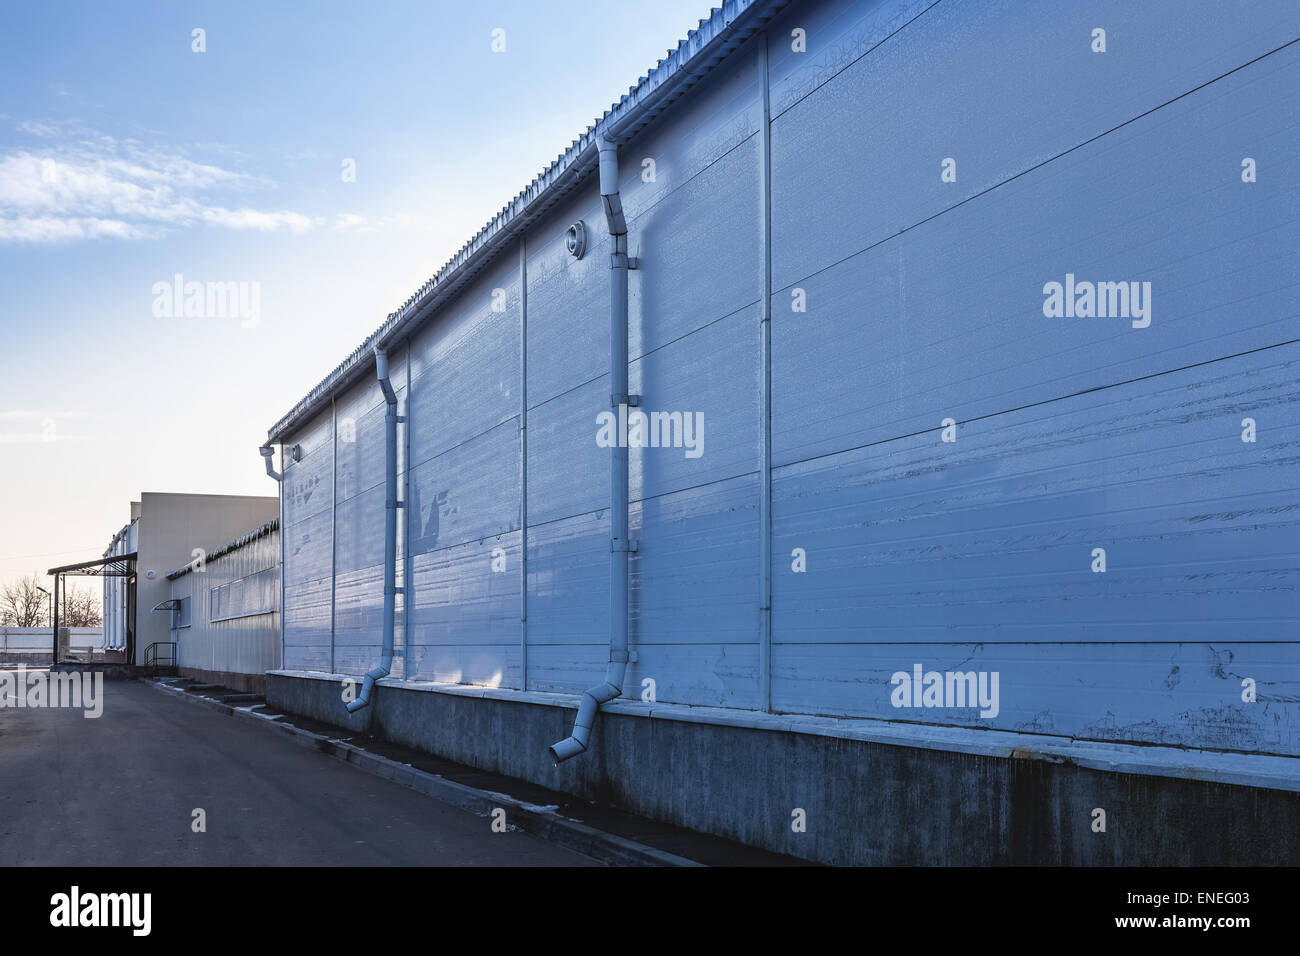 Plastic siding wall of industrial building with pipes Stock Photo